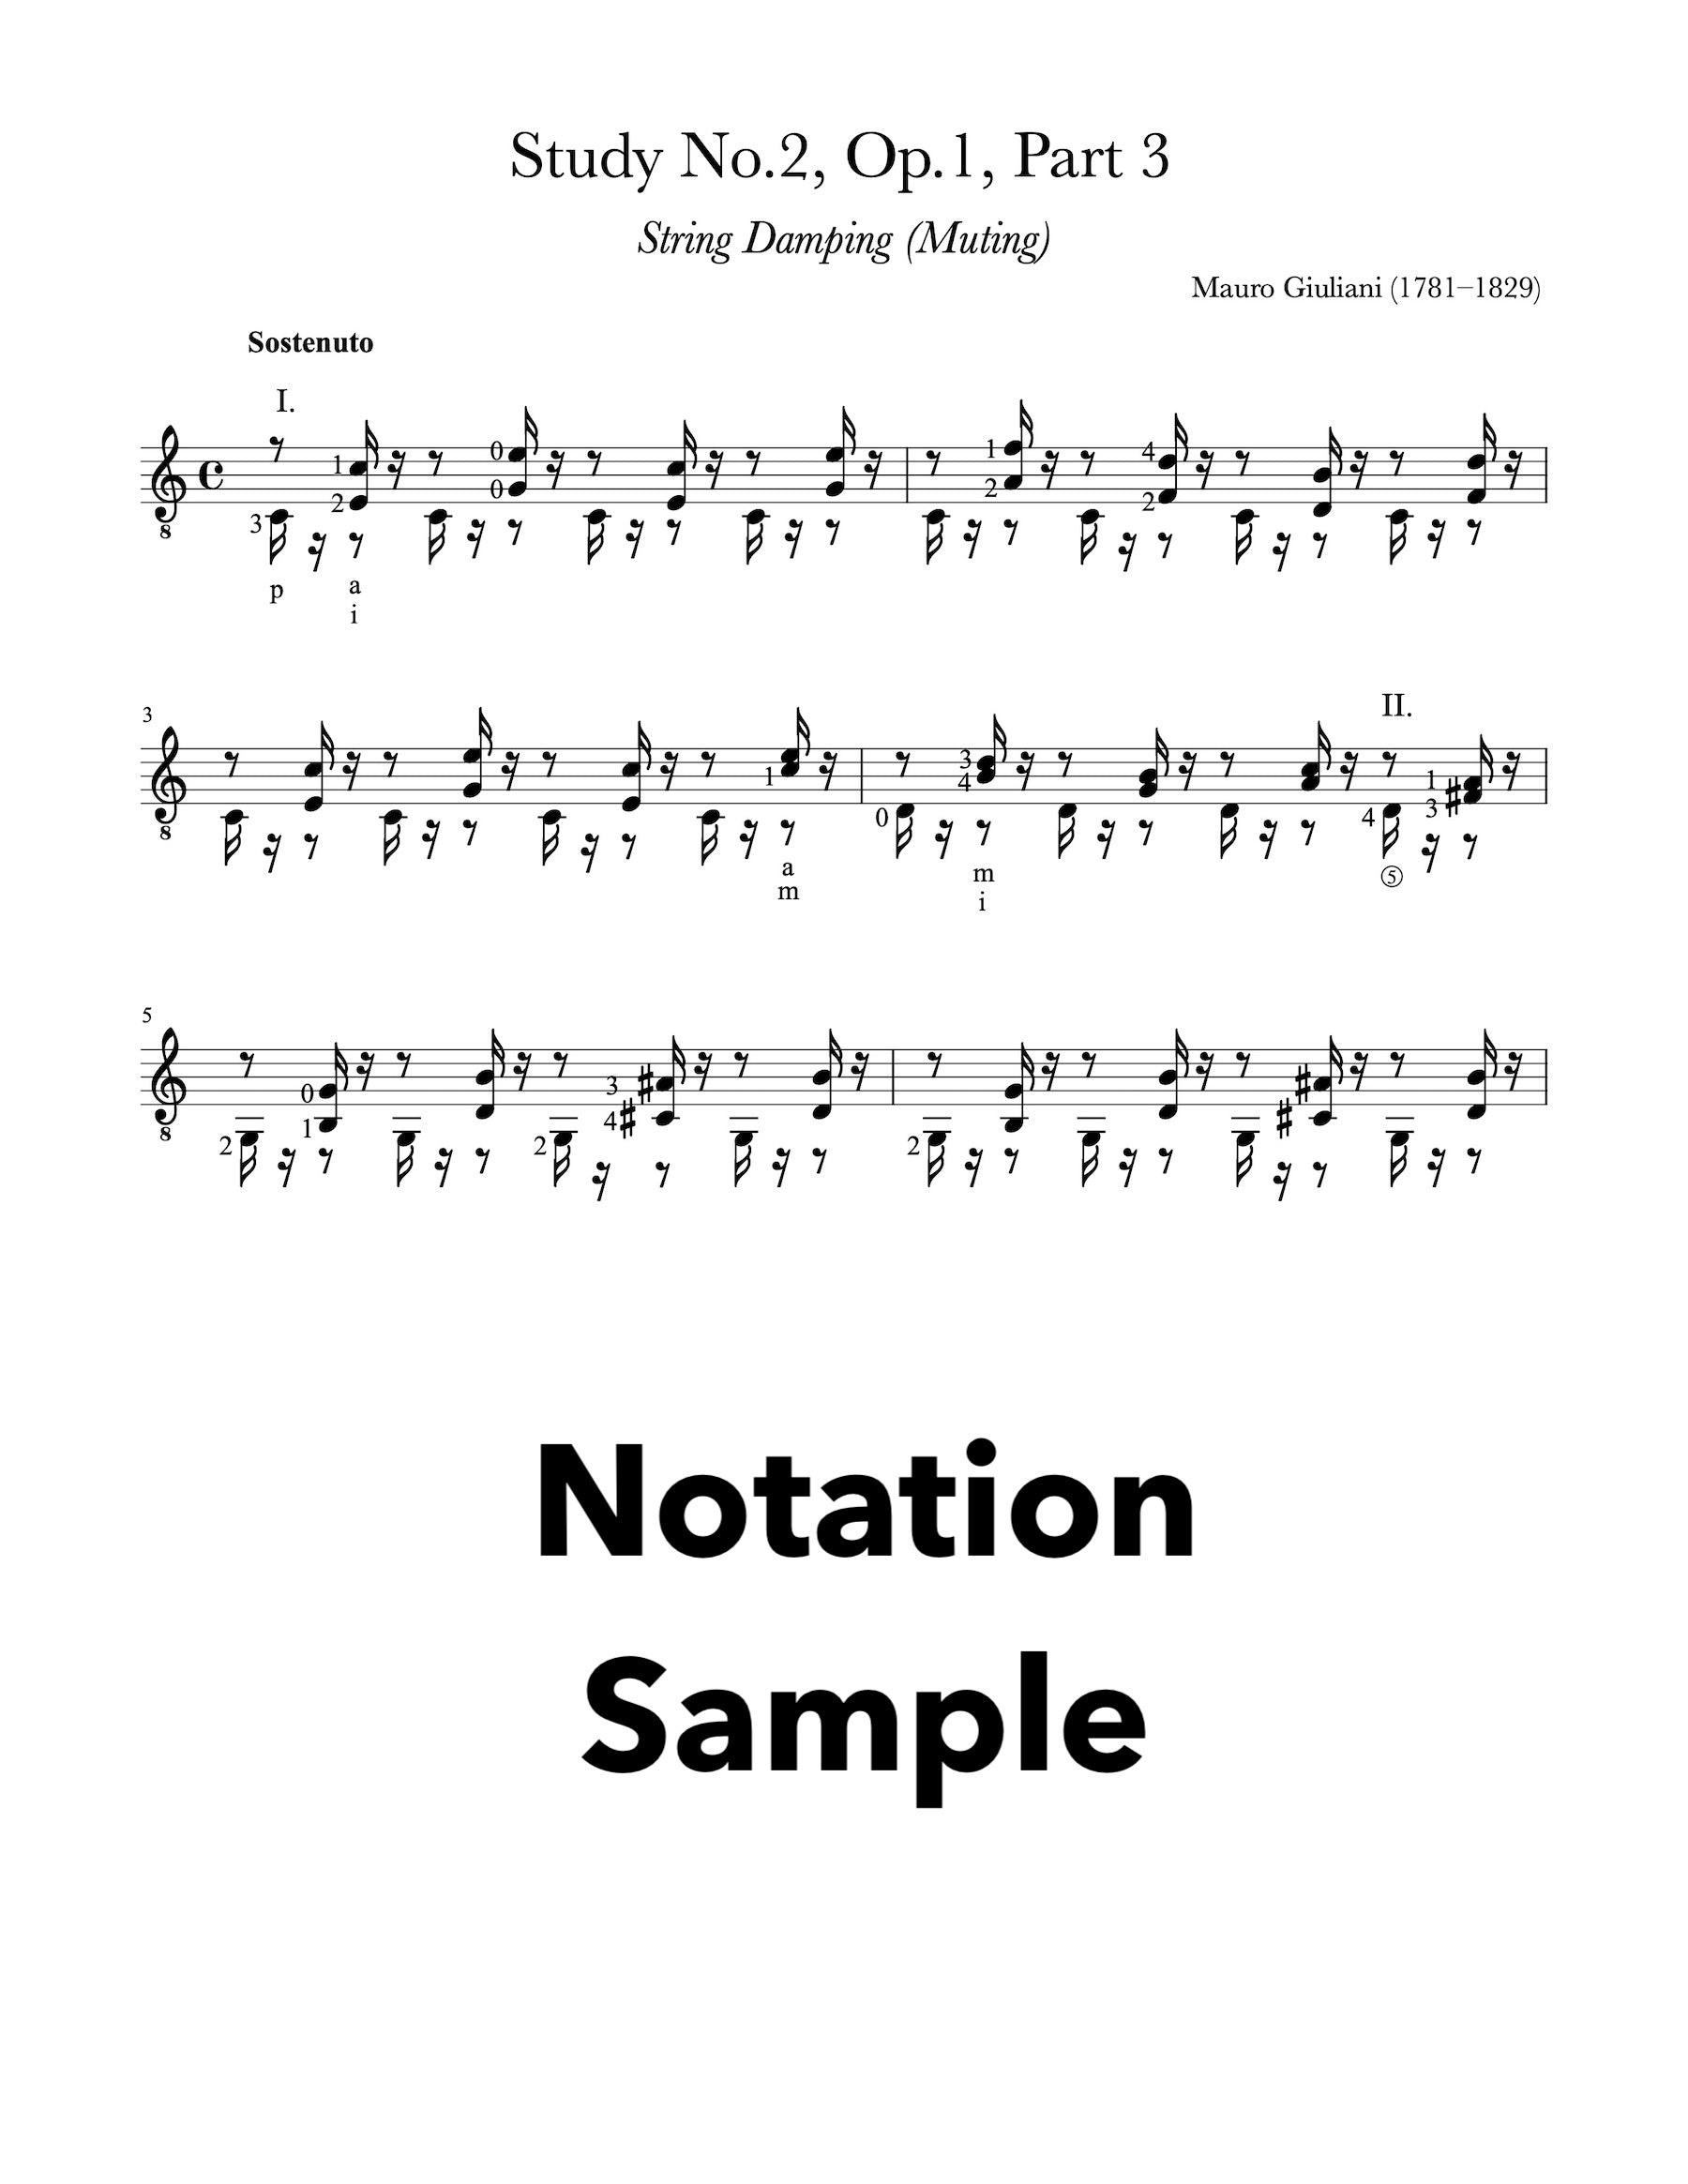 Study or Etude No.2, Op.1, Part 3 by Giuliani (Free PDF)